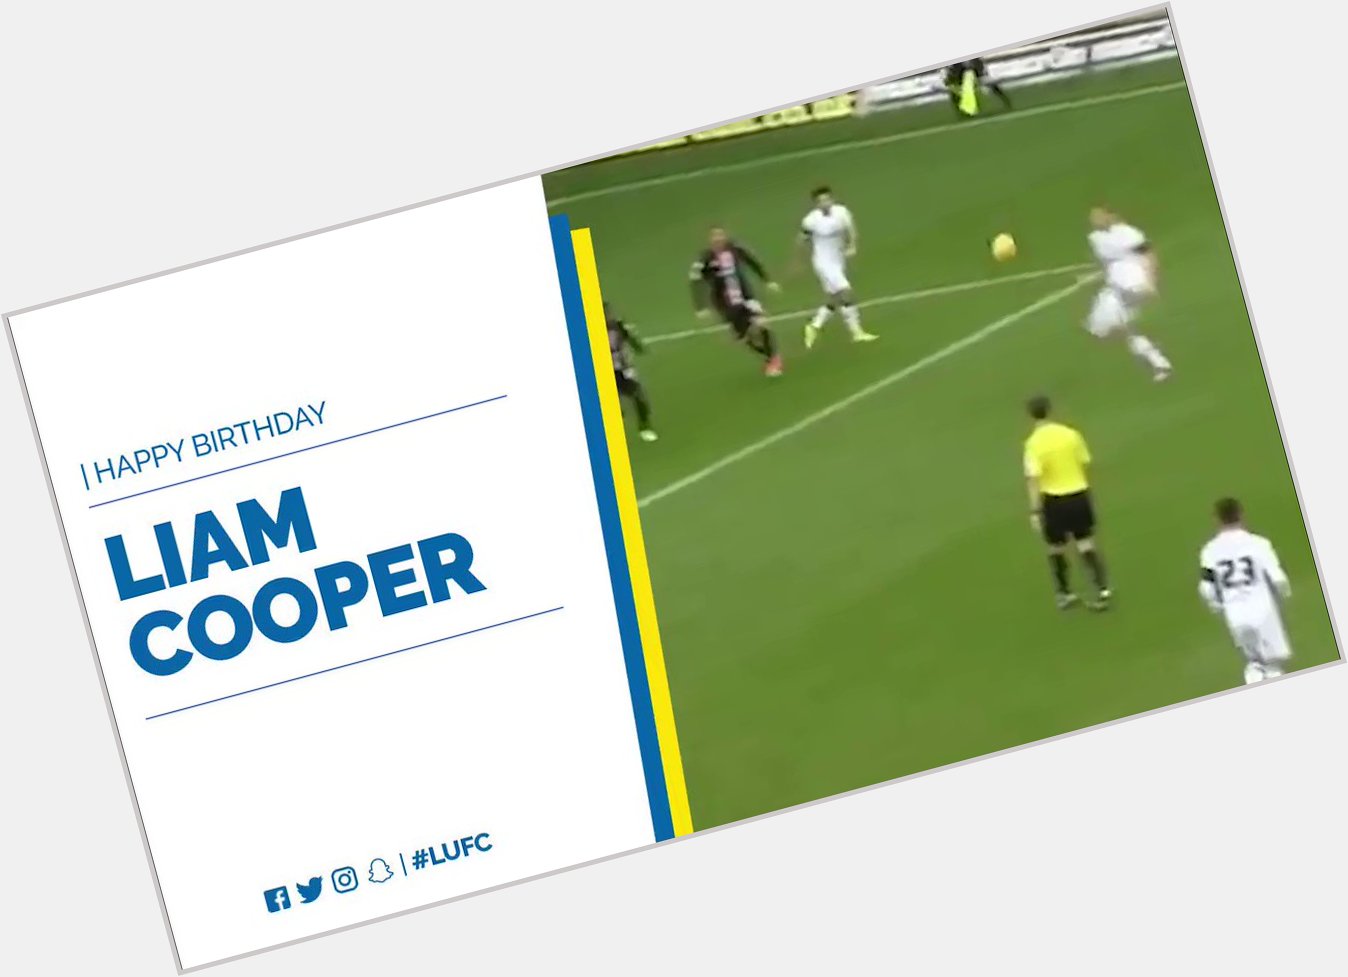  Happy Birthday to defender Liam Cooper, who celebrated turning 26 today! 